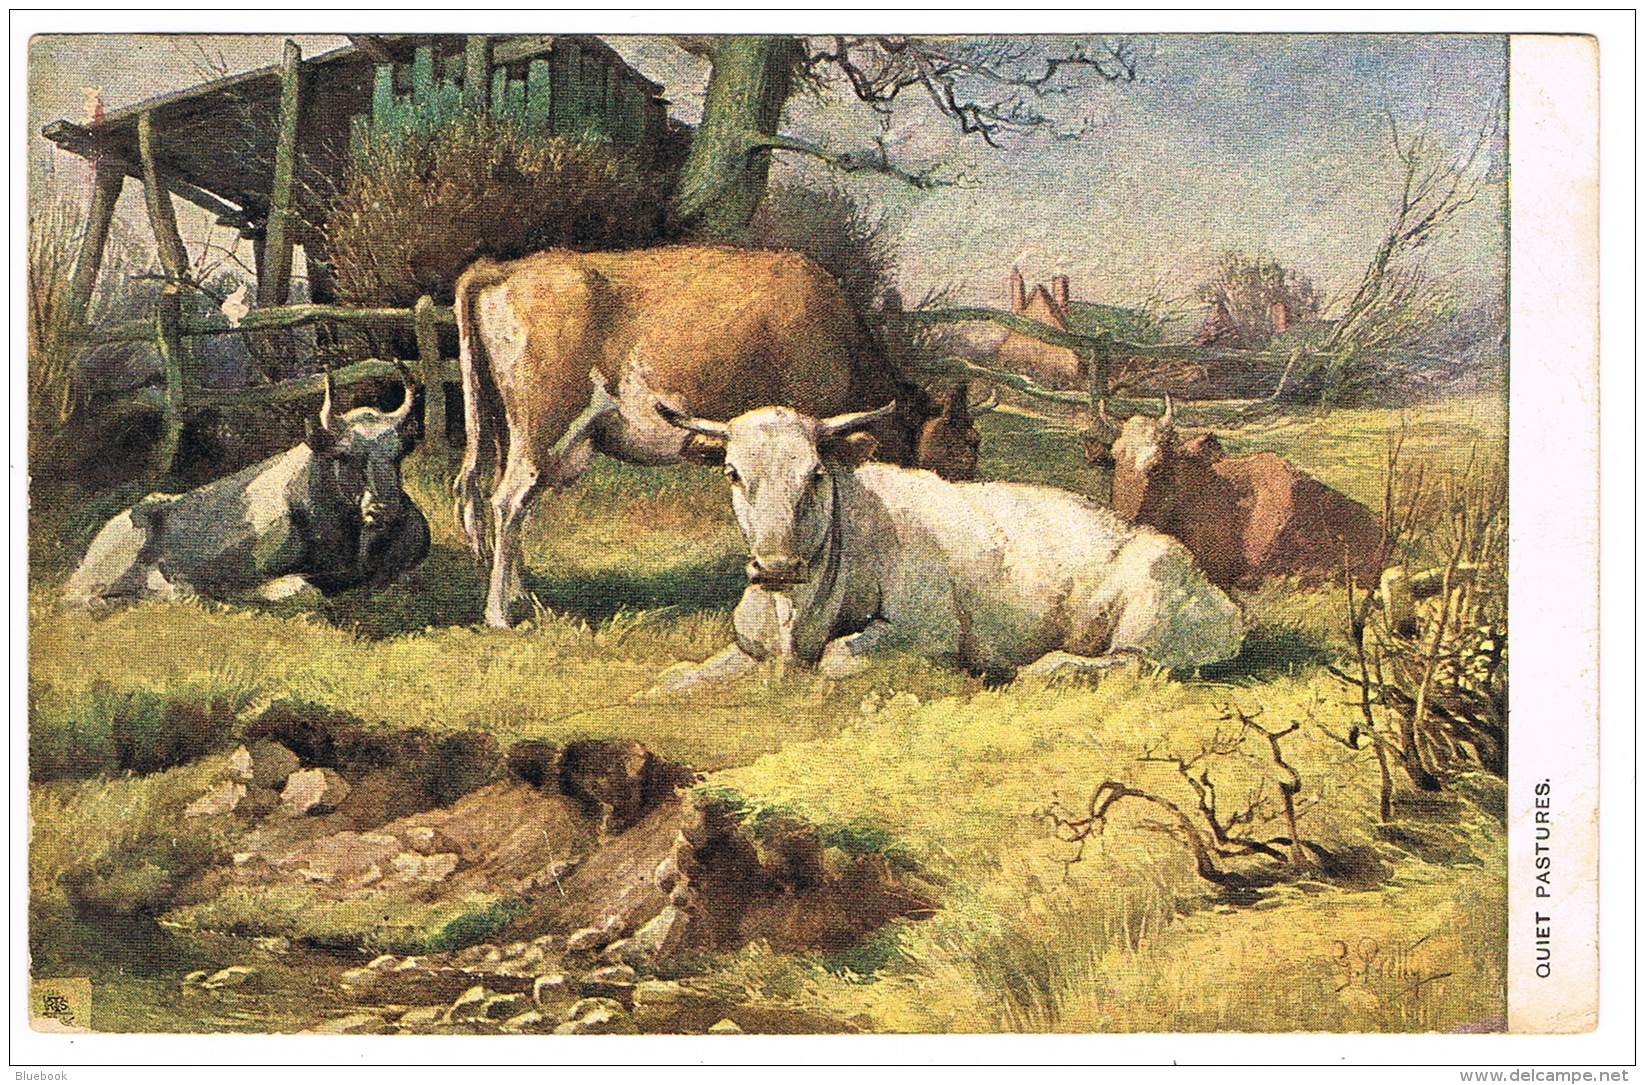 RB 1108 - Early 1900's Postcard - Cattle Cows - Animals Theme - 1d Rate Brisbane Australia - Covers & Documents